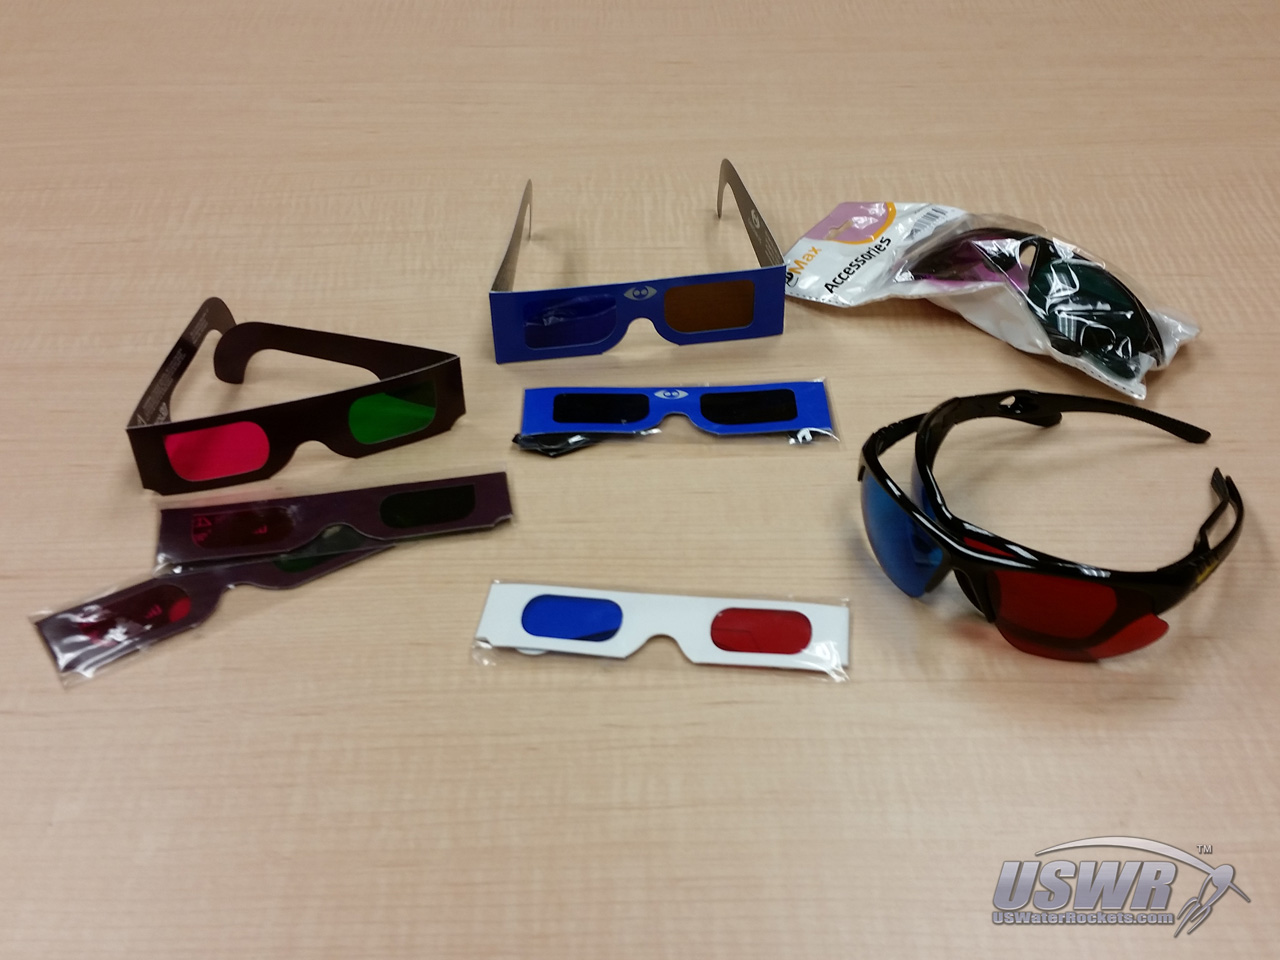 Various 3D glasses which you can use with YouTube or other Anaglyph software to view the 3D images you create.